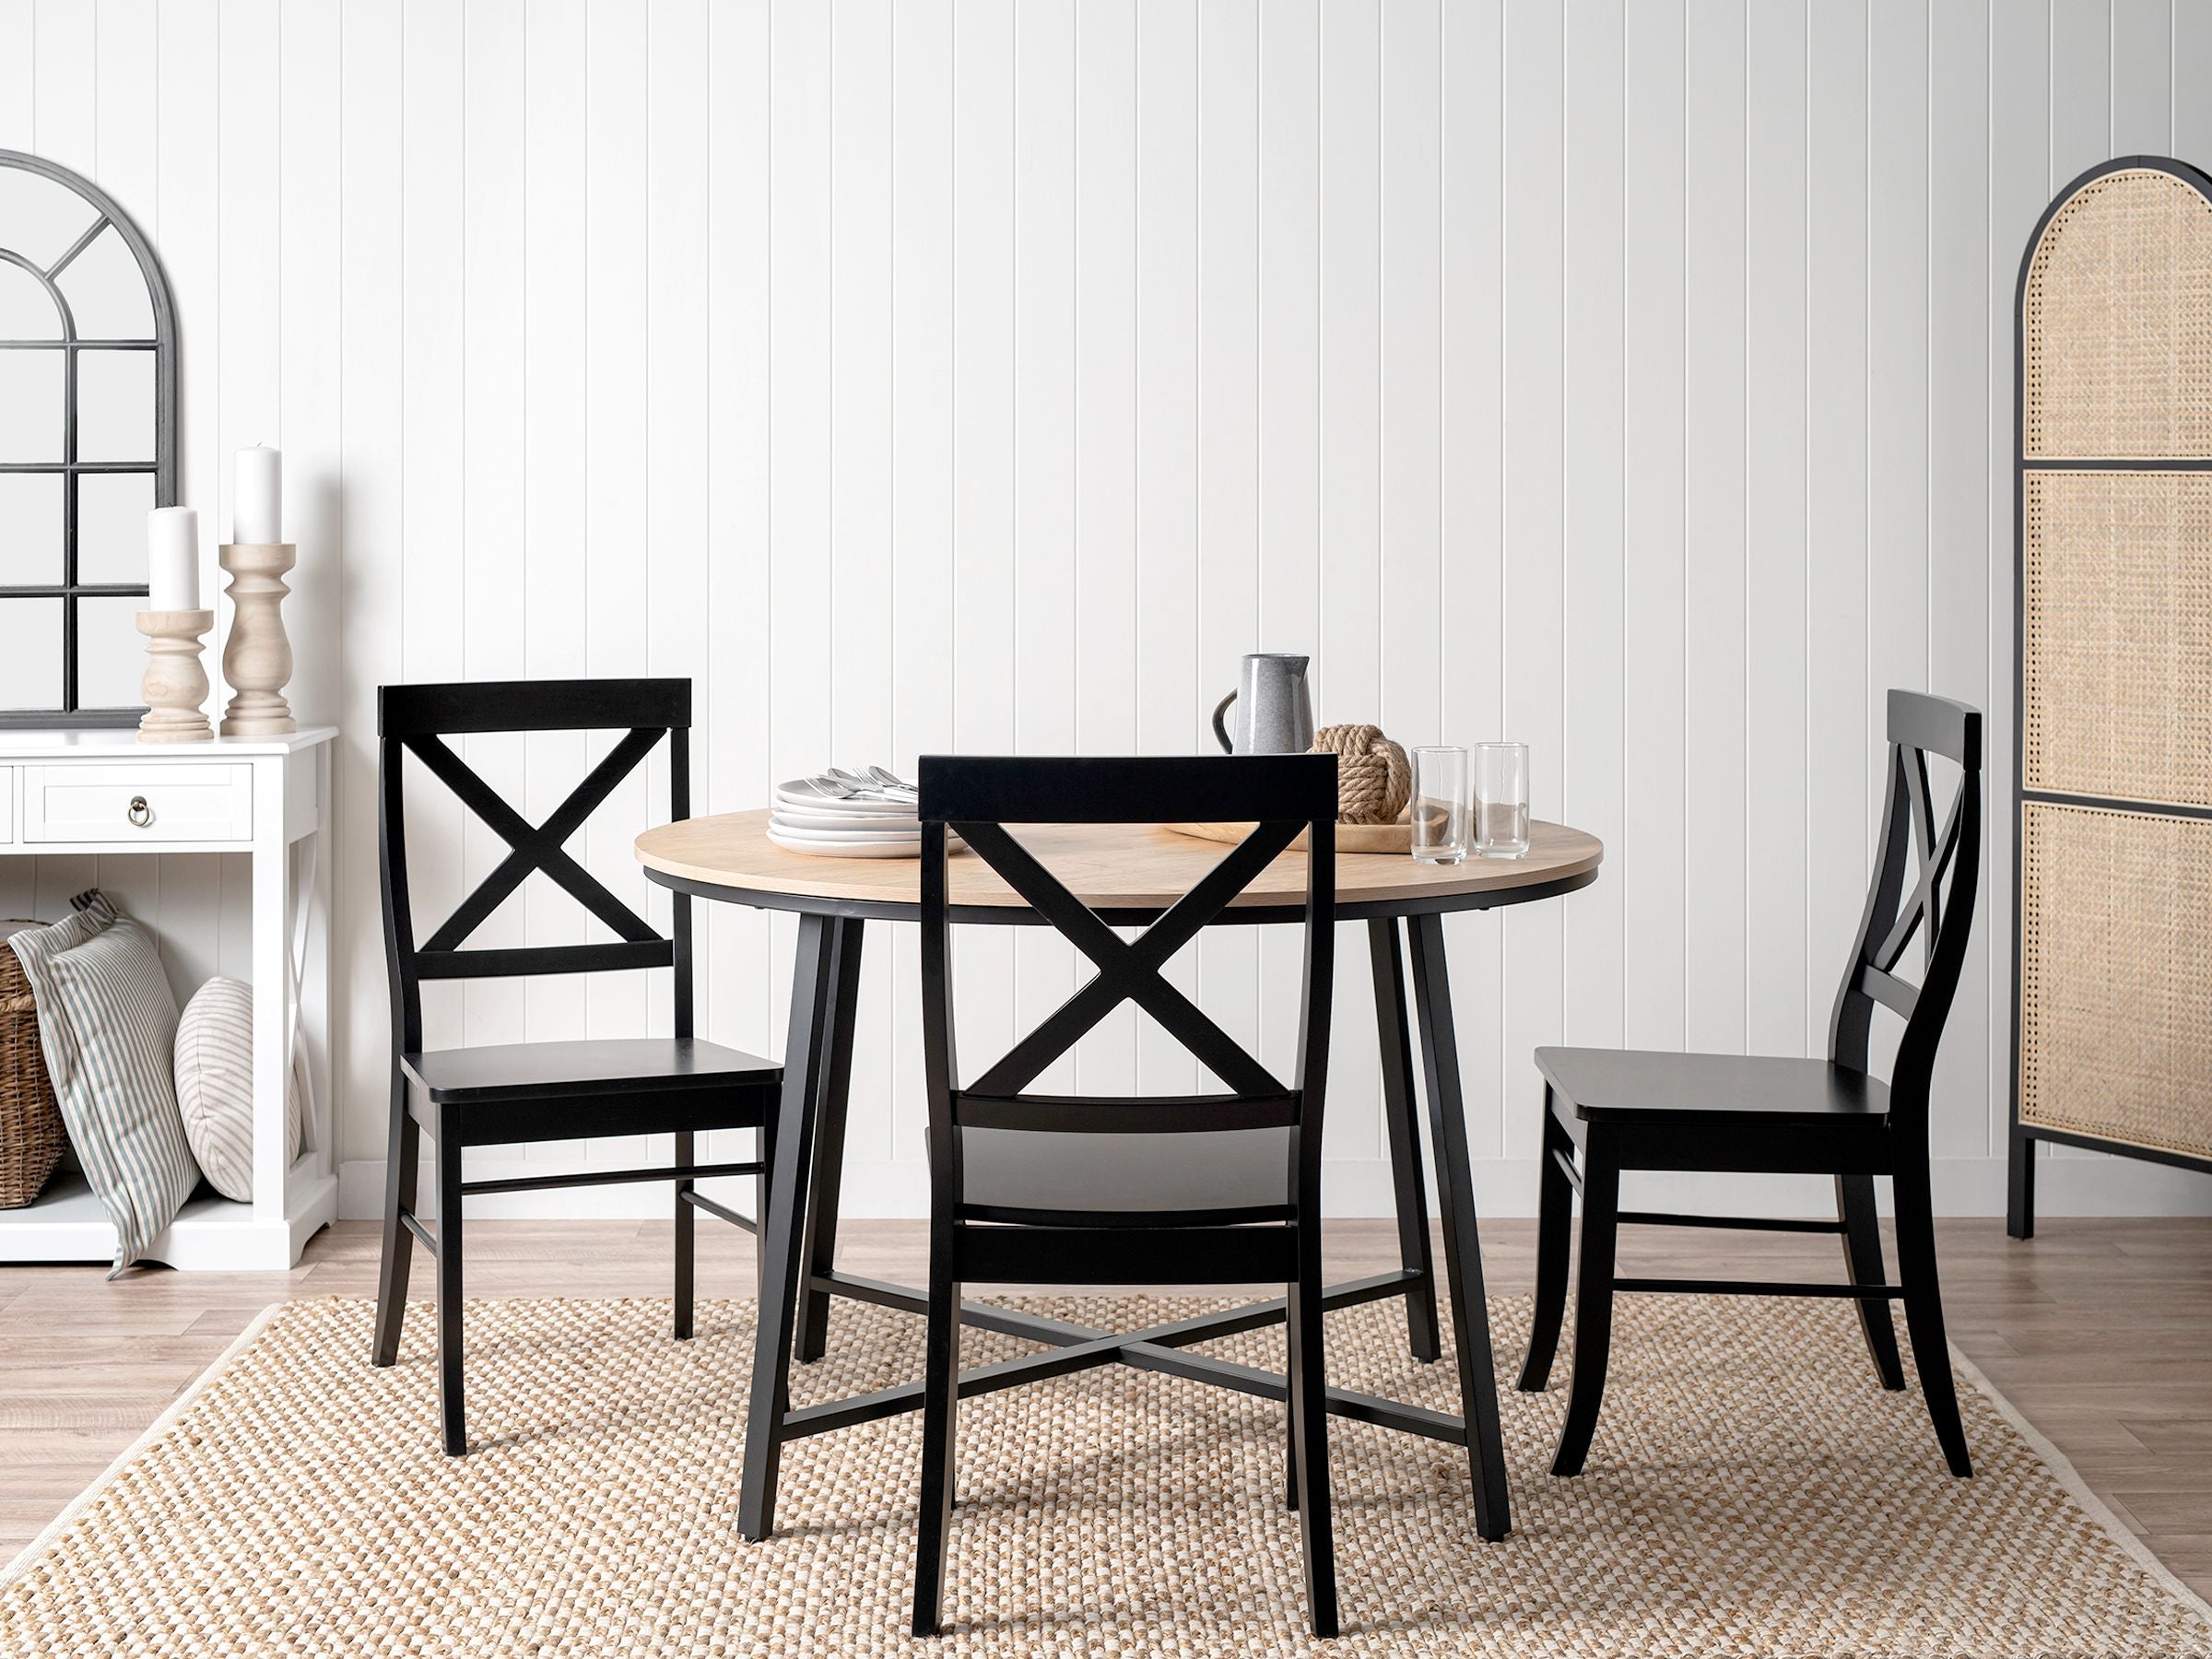 Shop the versatile Hamptons Dining Chair Range. Available in Black, White and White/ Natural.